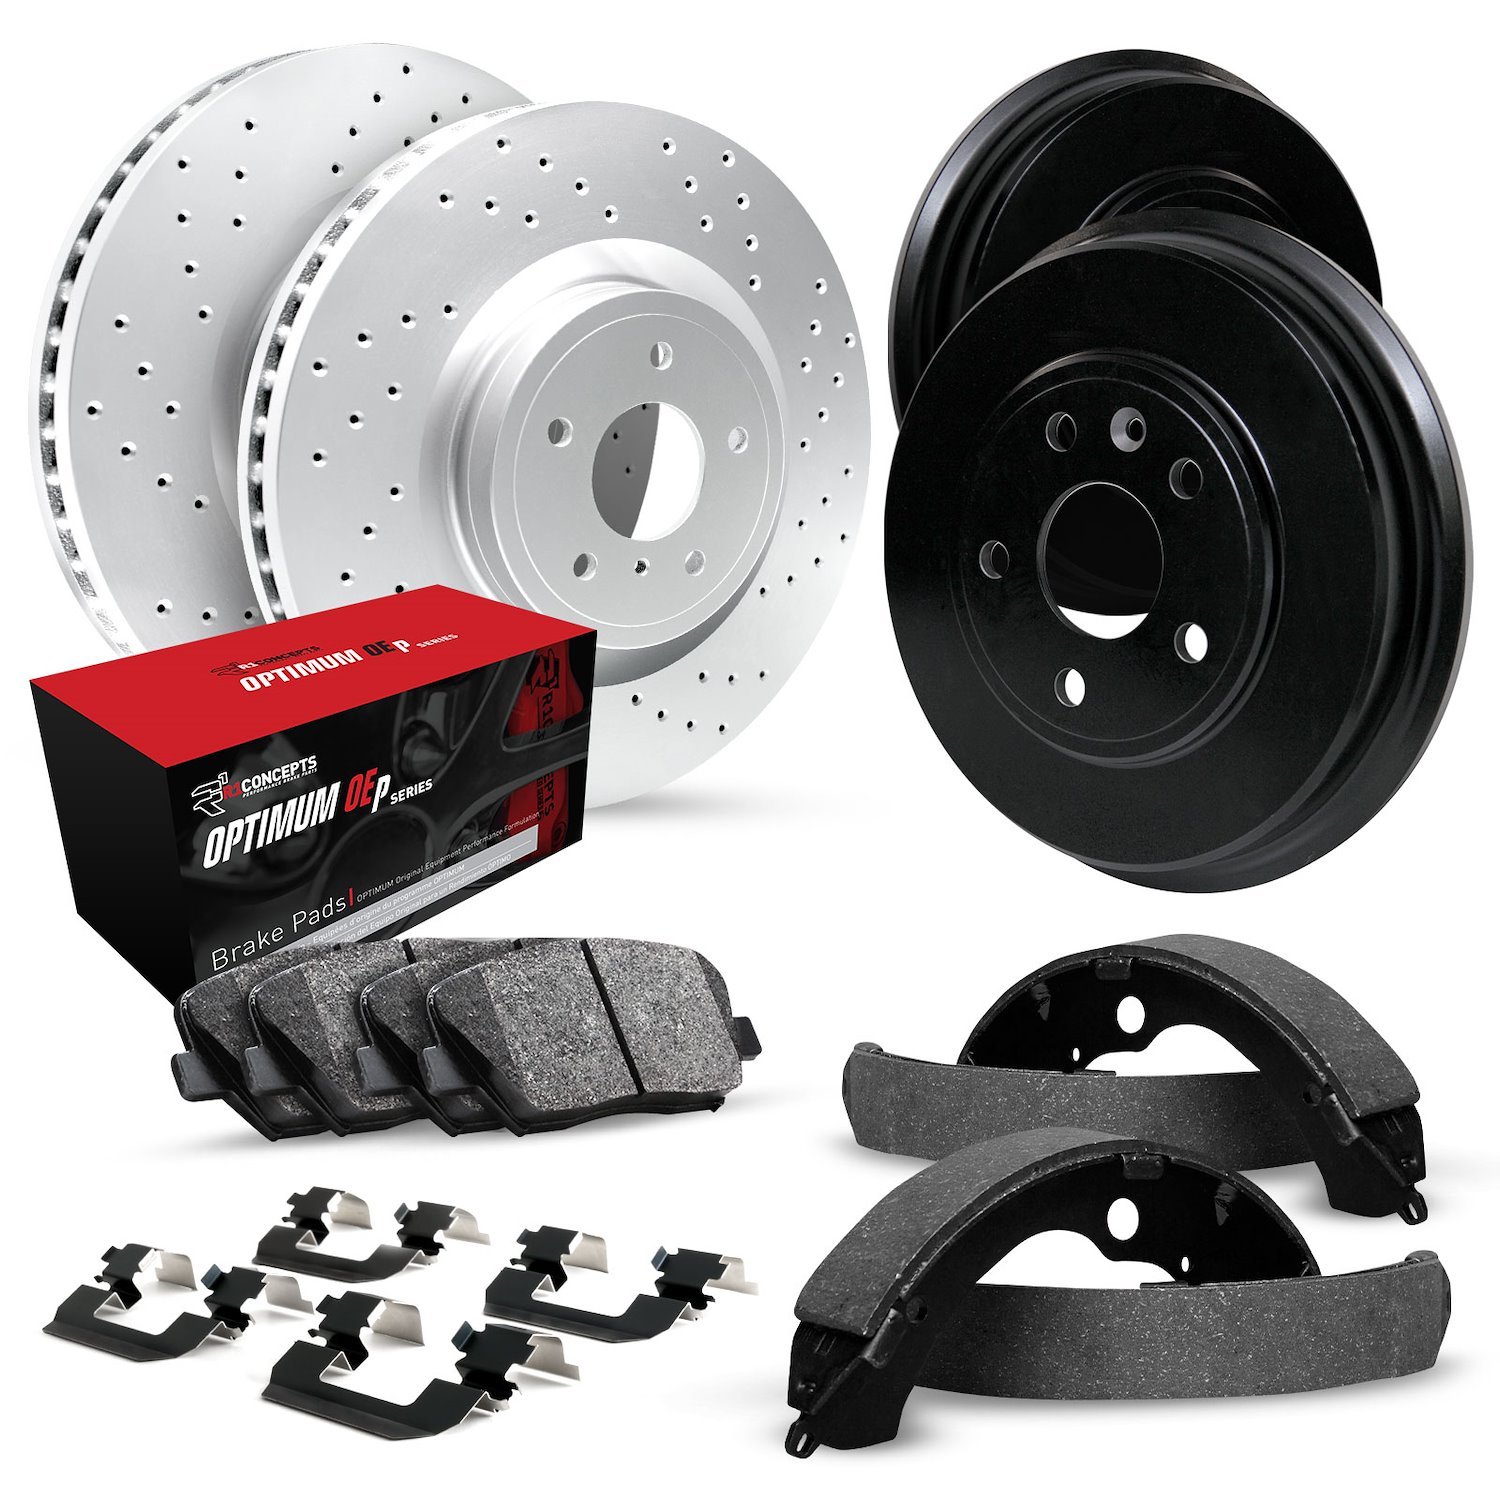 GEO-Carbon Drilled Brake Rotor & Drum Set w/Optimum OE Pads, Shoes, & Hardware, 1984-1984 GM, Position: Front & Rear